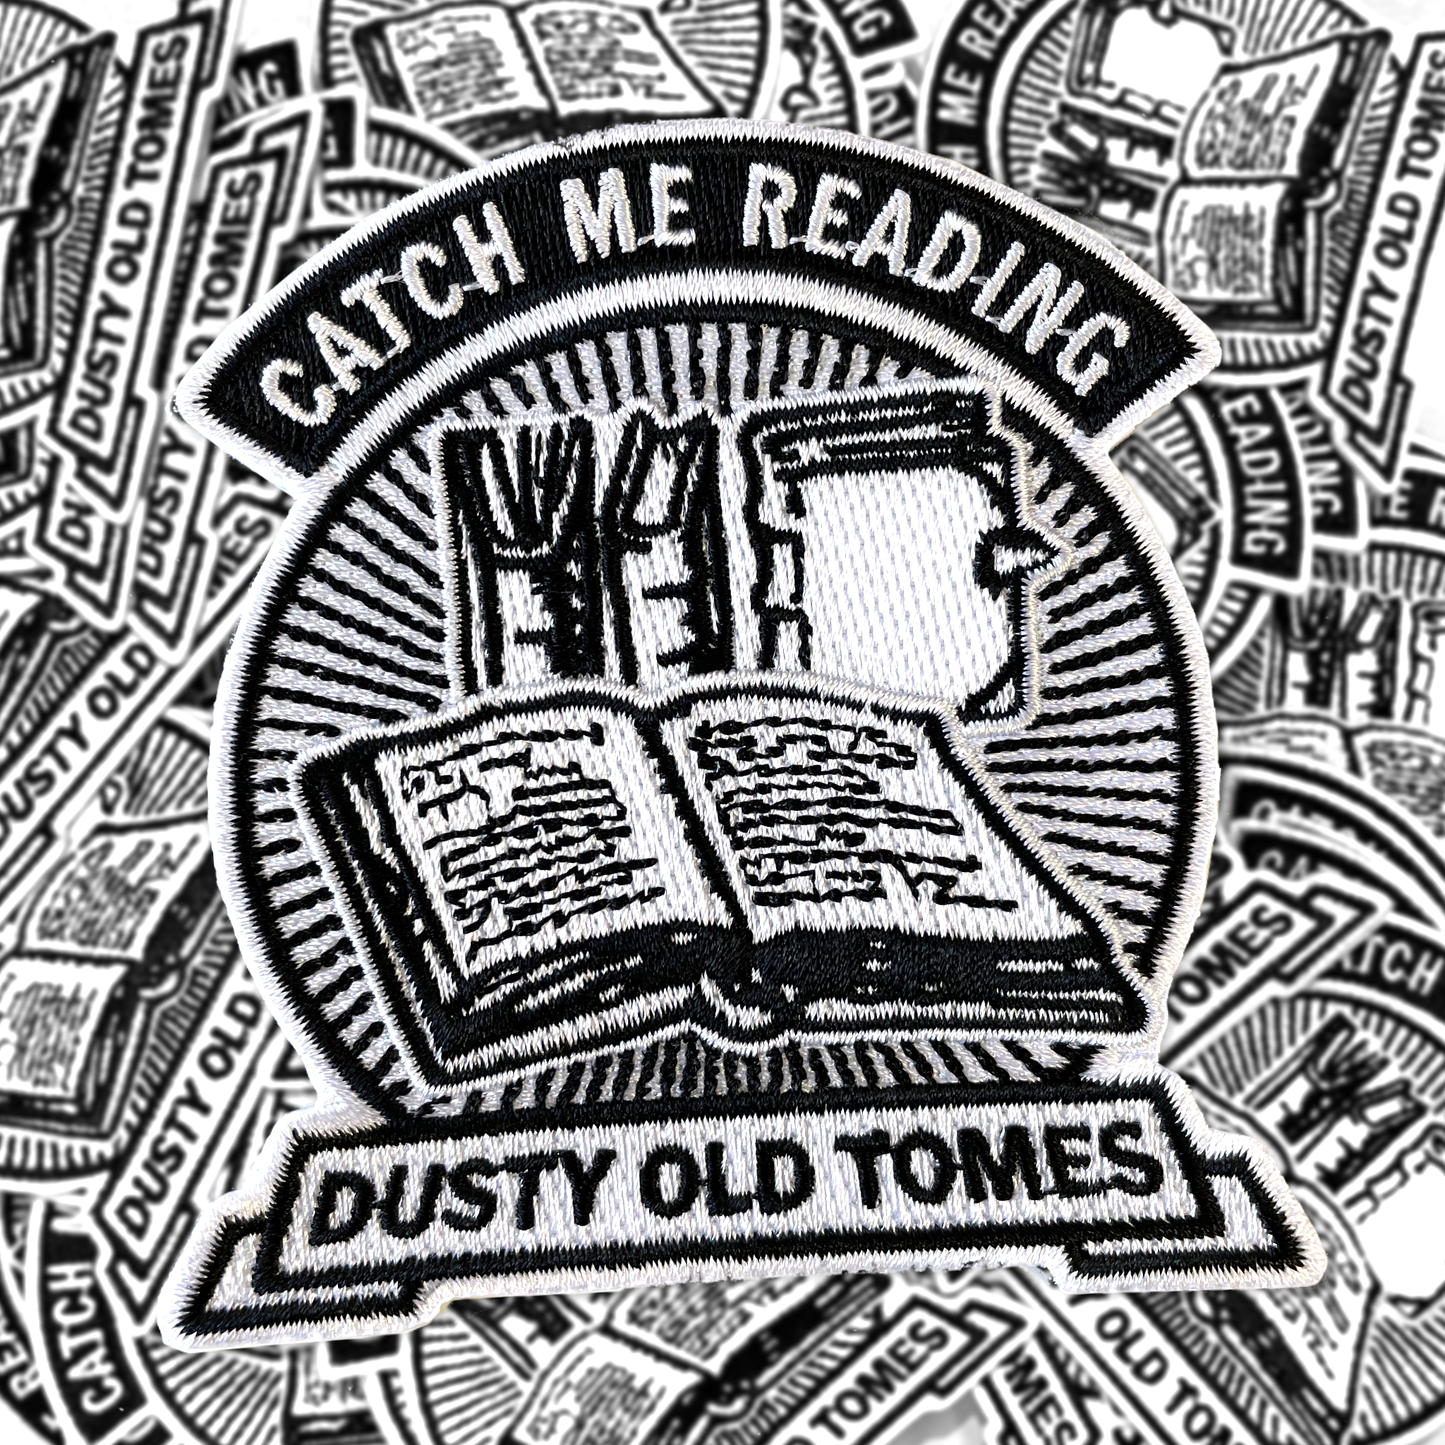 "Dusty Old Tomes" Patch